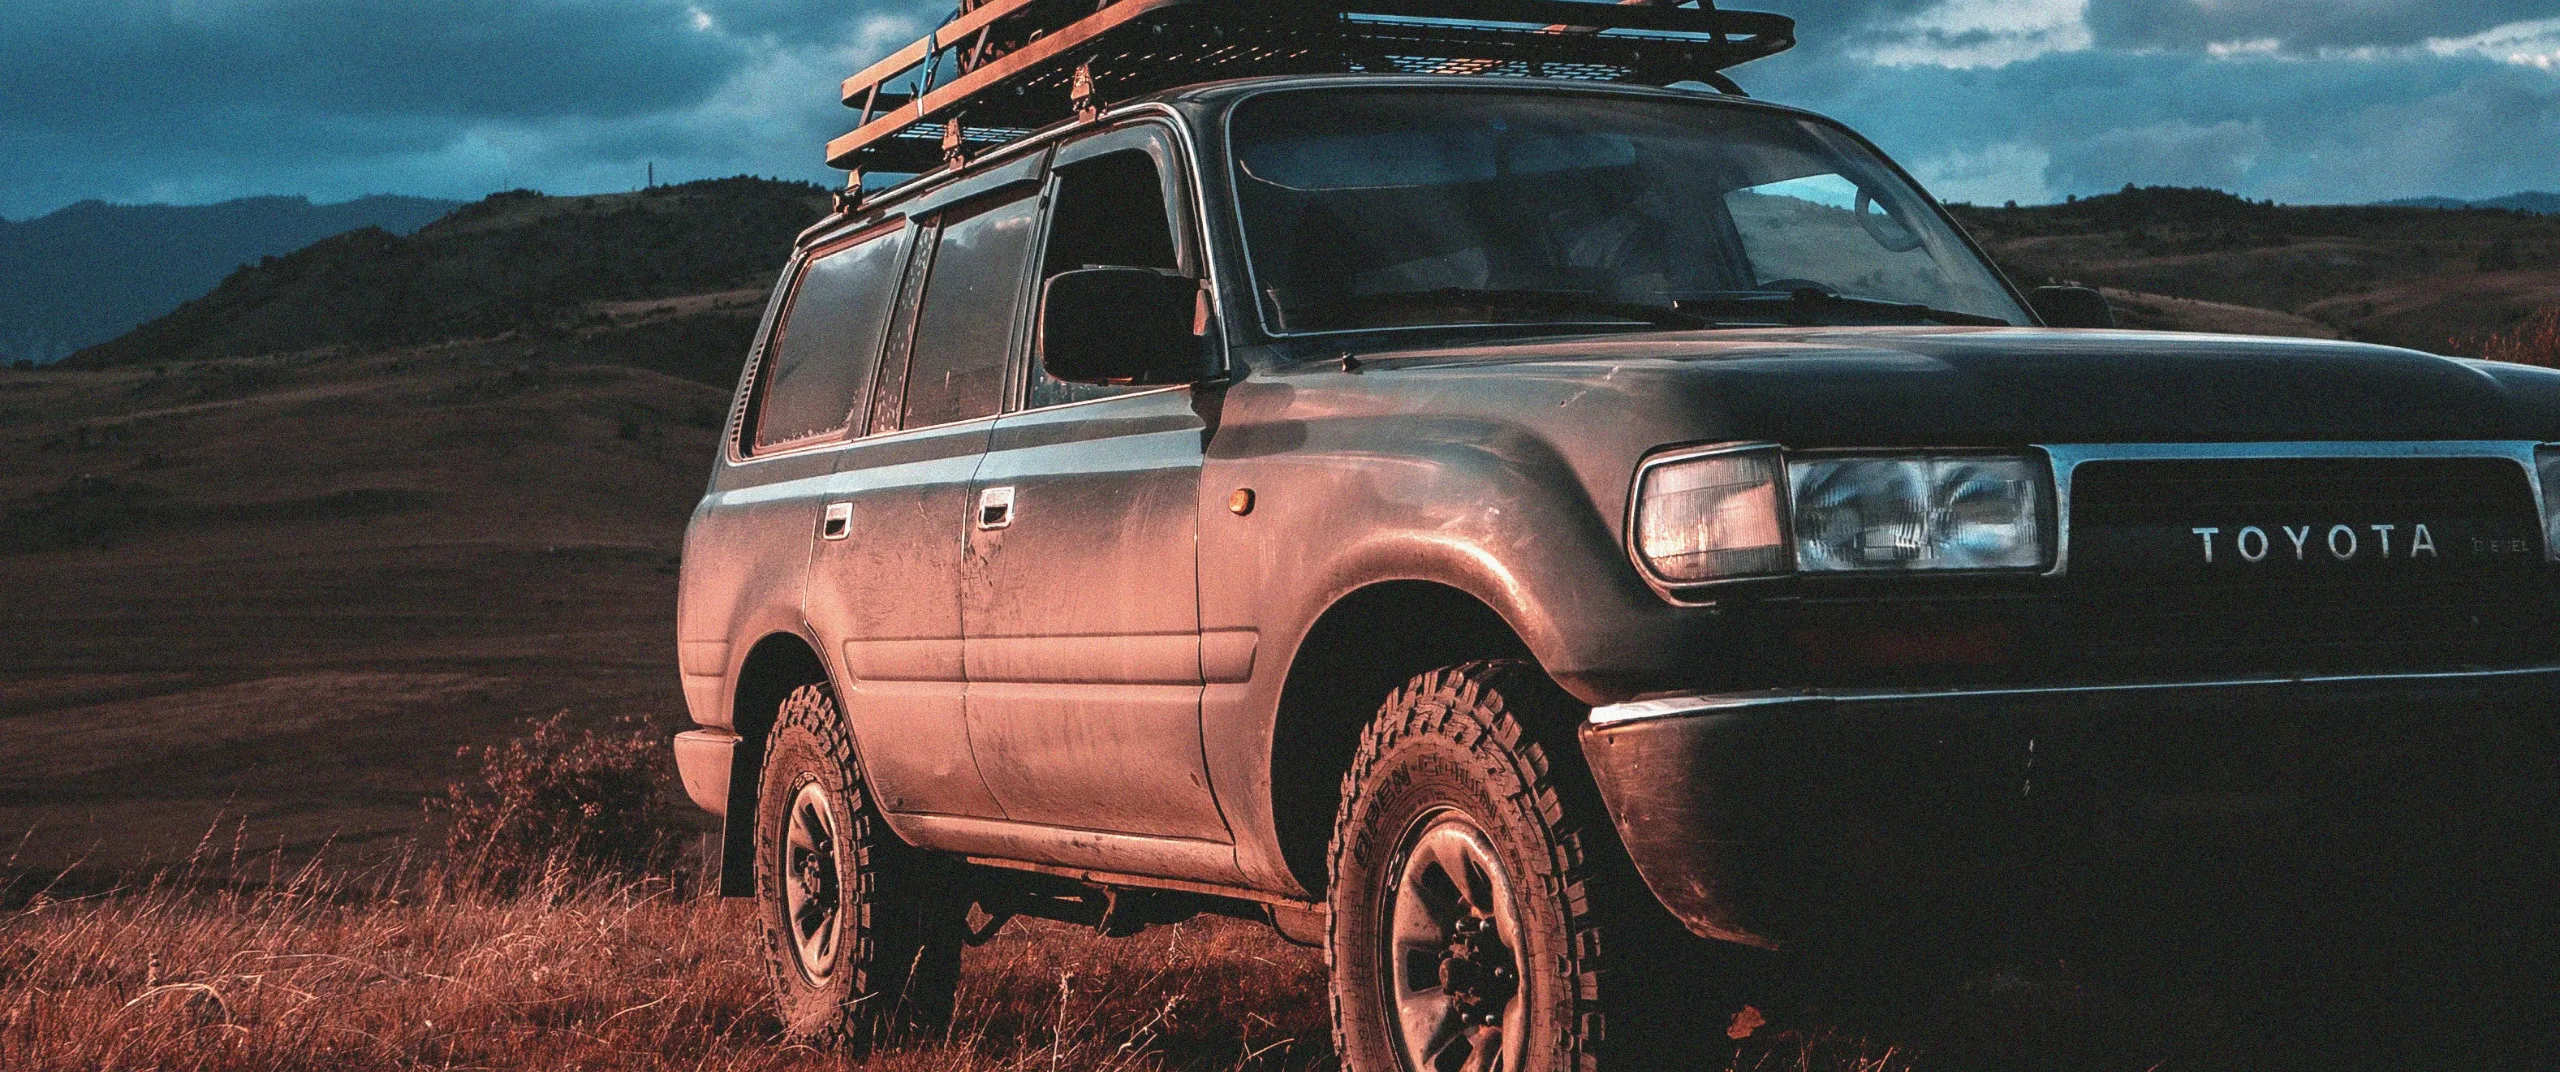 4x4 essentials: your guide to going bush